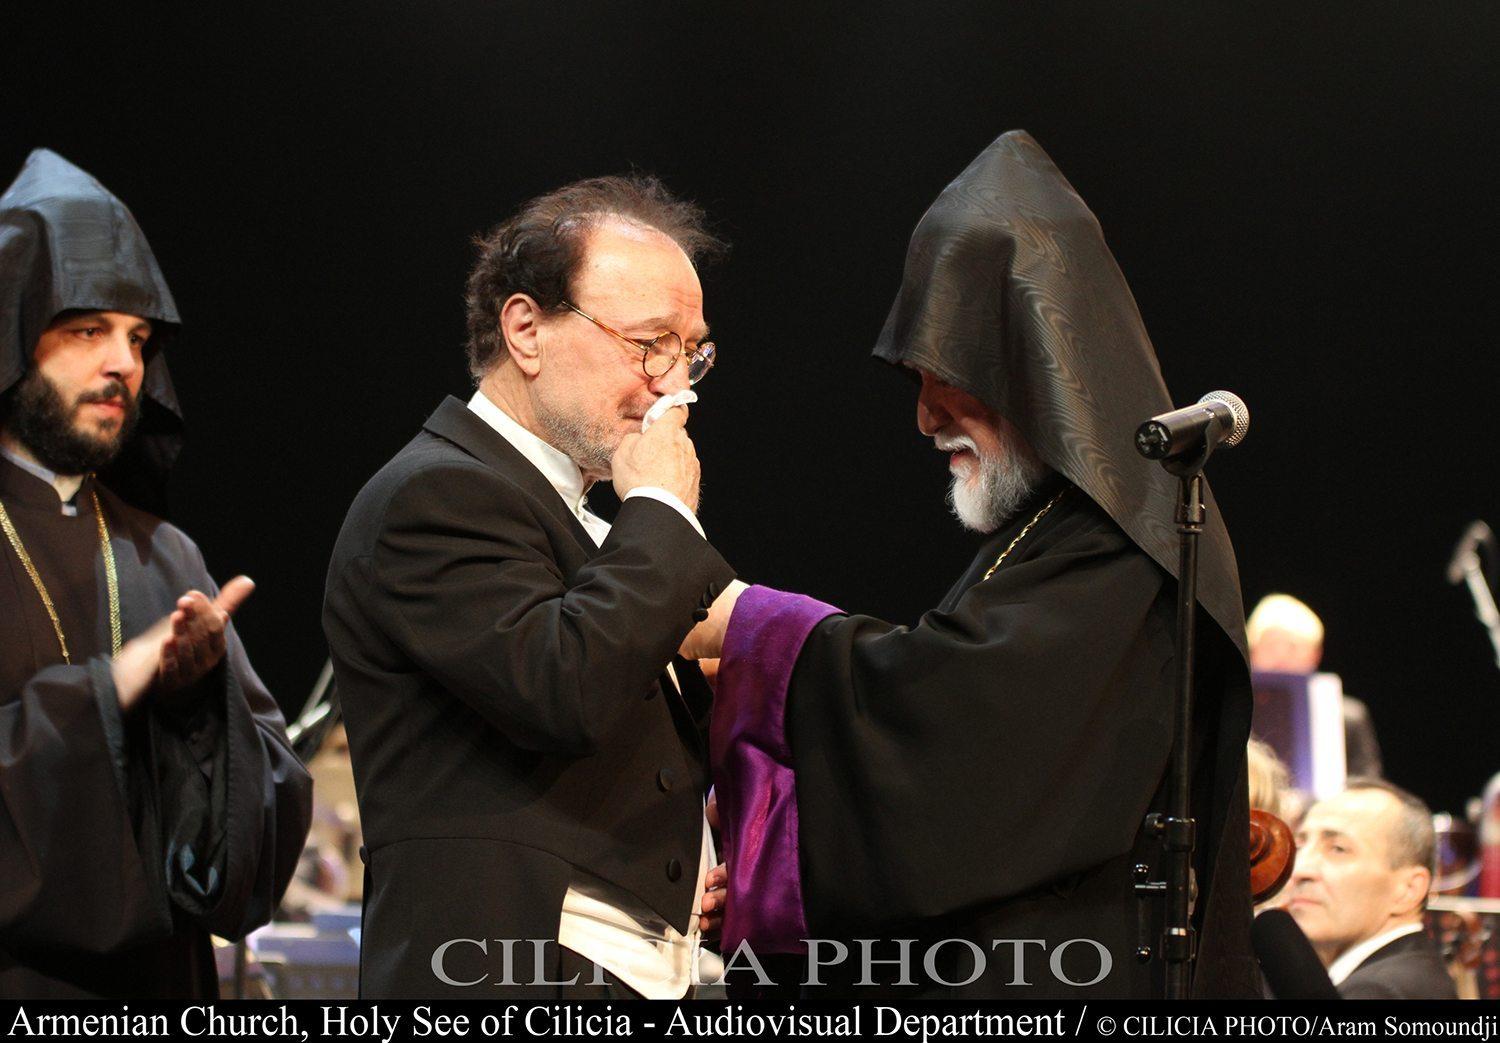 His Holiness Aram I decorates Vartan Melkonian, an orphan of Birds’ Nest and a conductor of the Royal Philharmonic Orchestra based in London